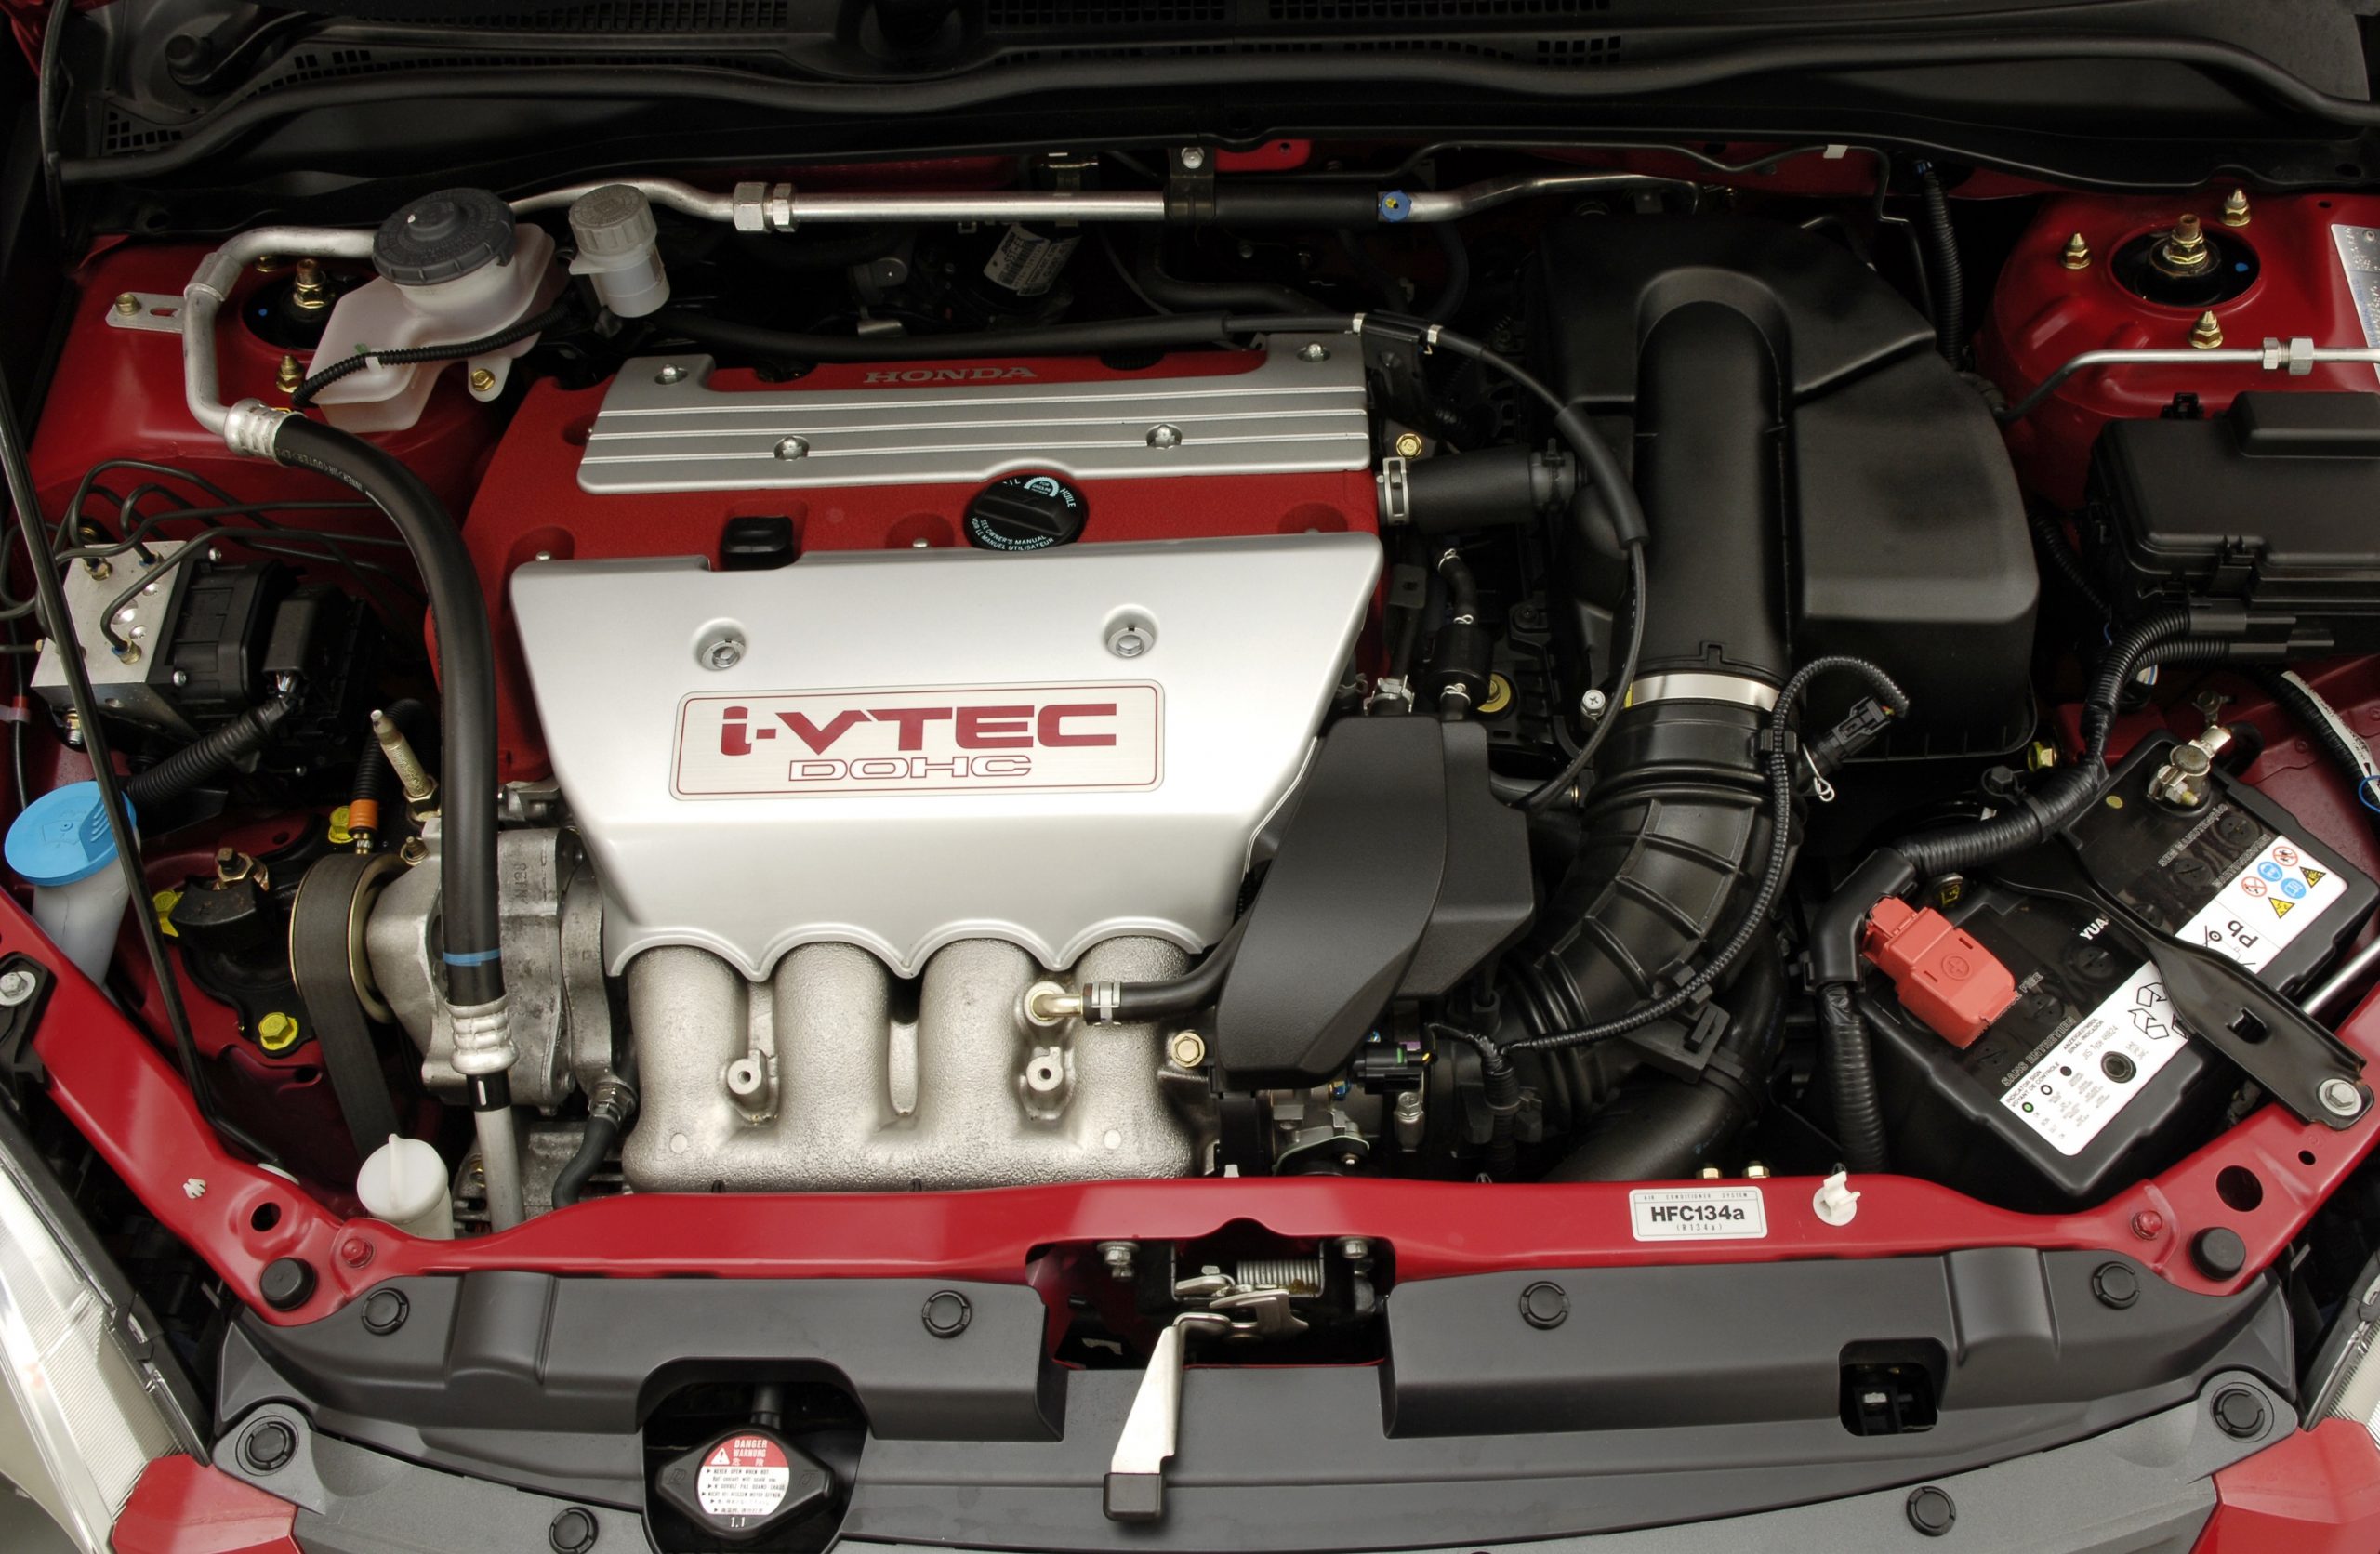 The engine bay of a Honda Civic Type R in red